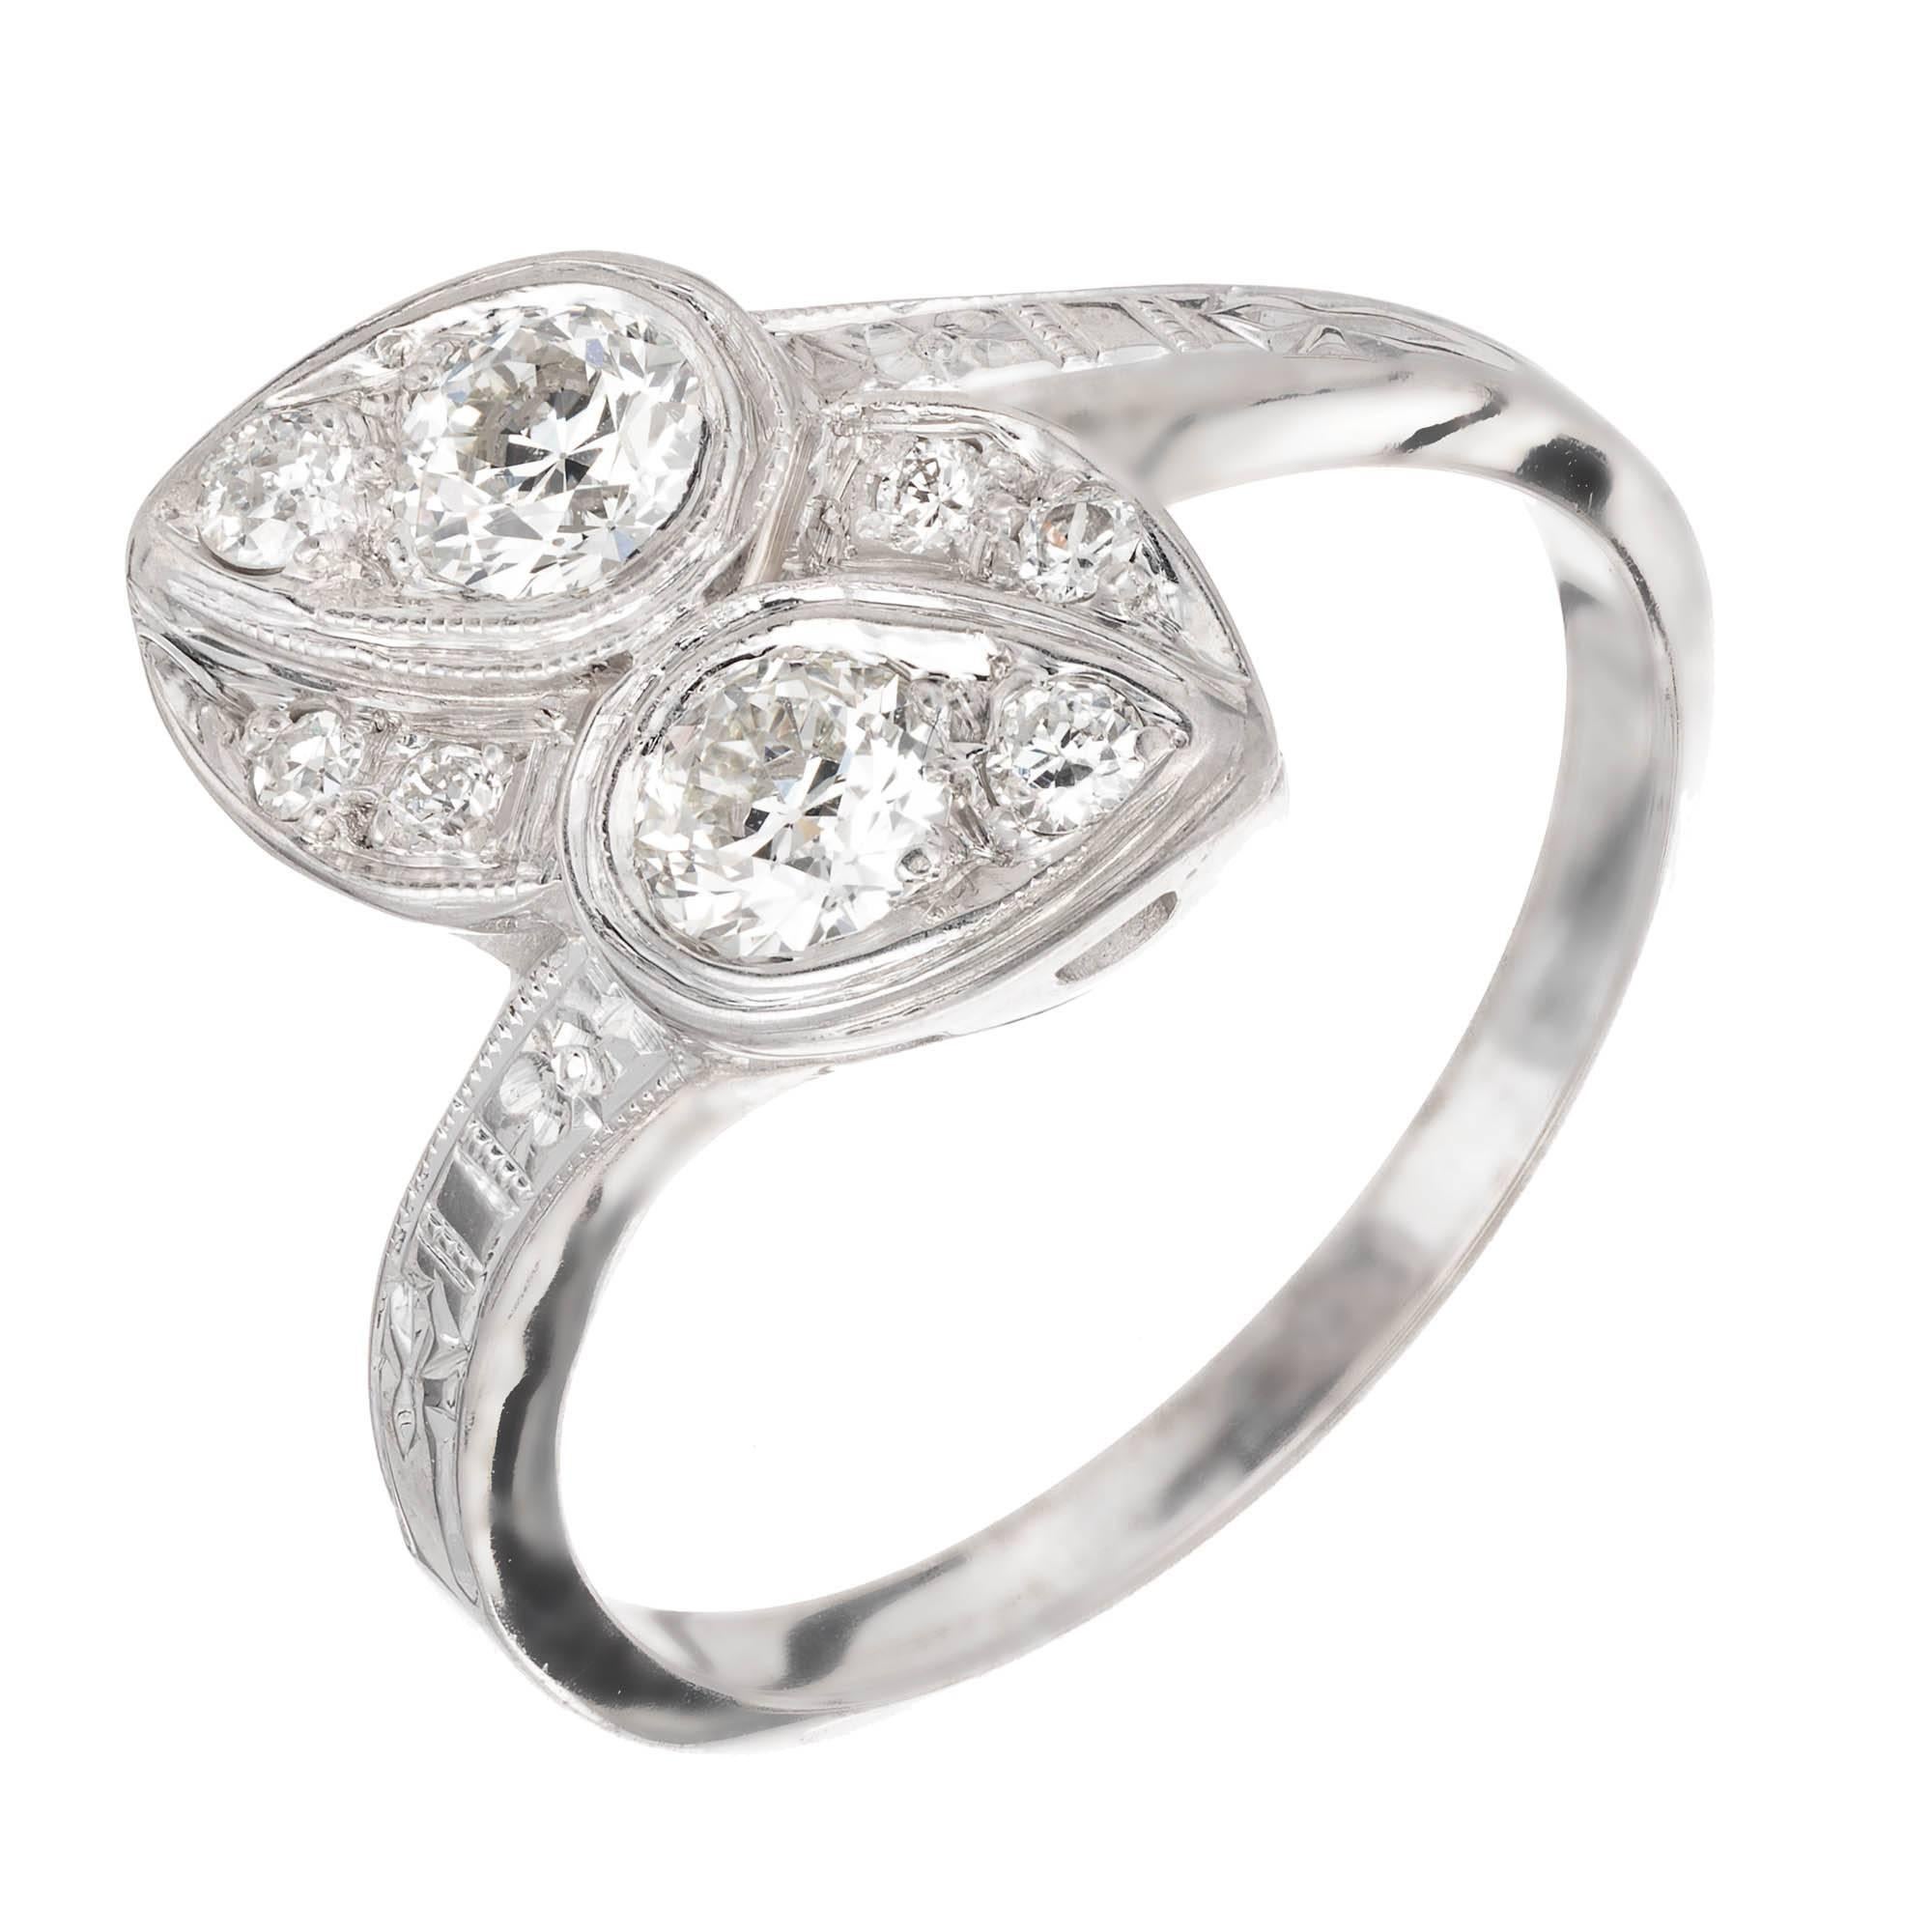 Diamond 14k white gold bypass ring. Two main round diamonds set in a Lily pad design facing opposite each other to a slight diagonal. Two small round diamonds are set to make a pear appearance while additional diamonds are set off the side. Detailed